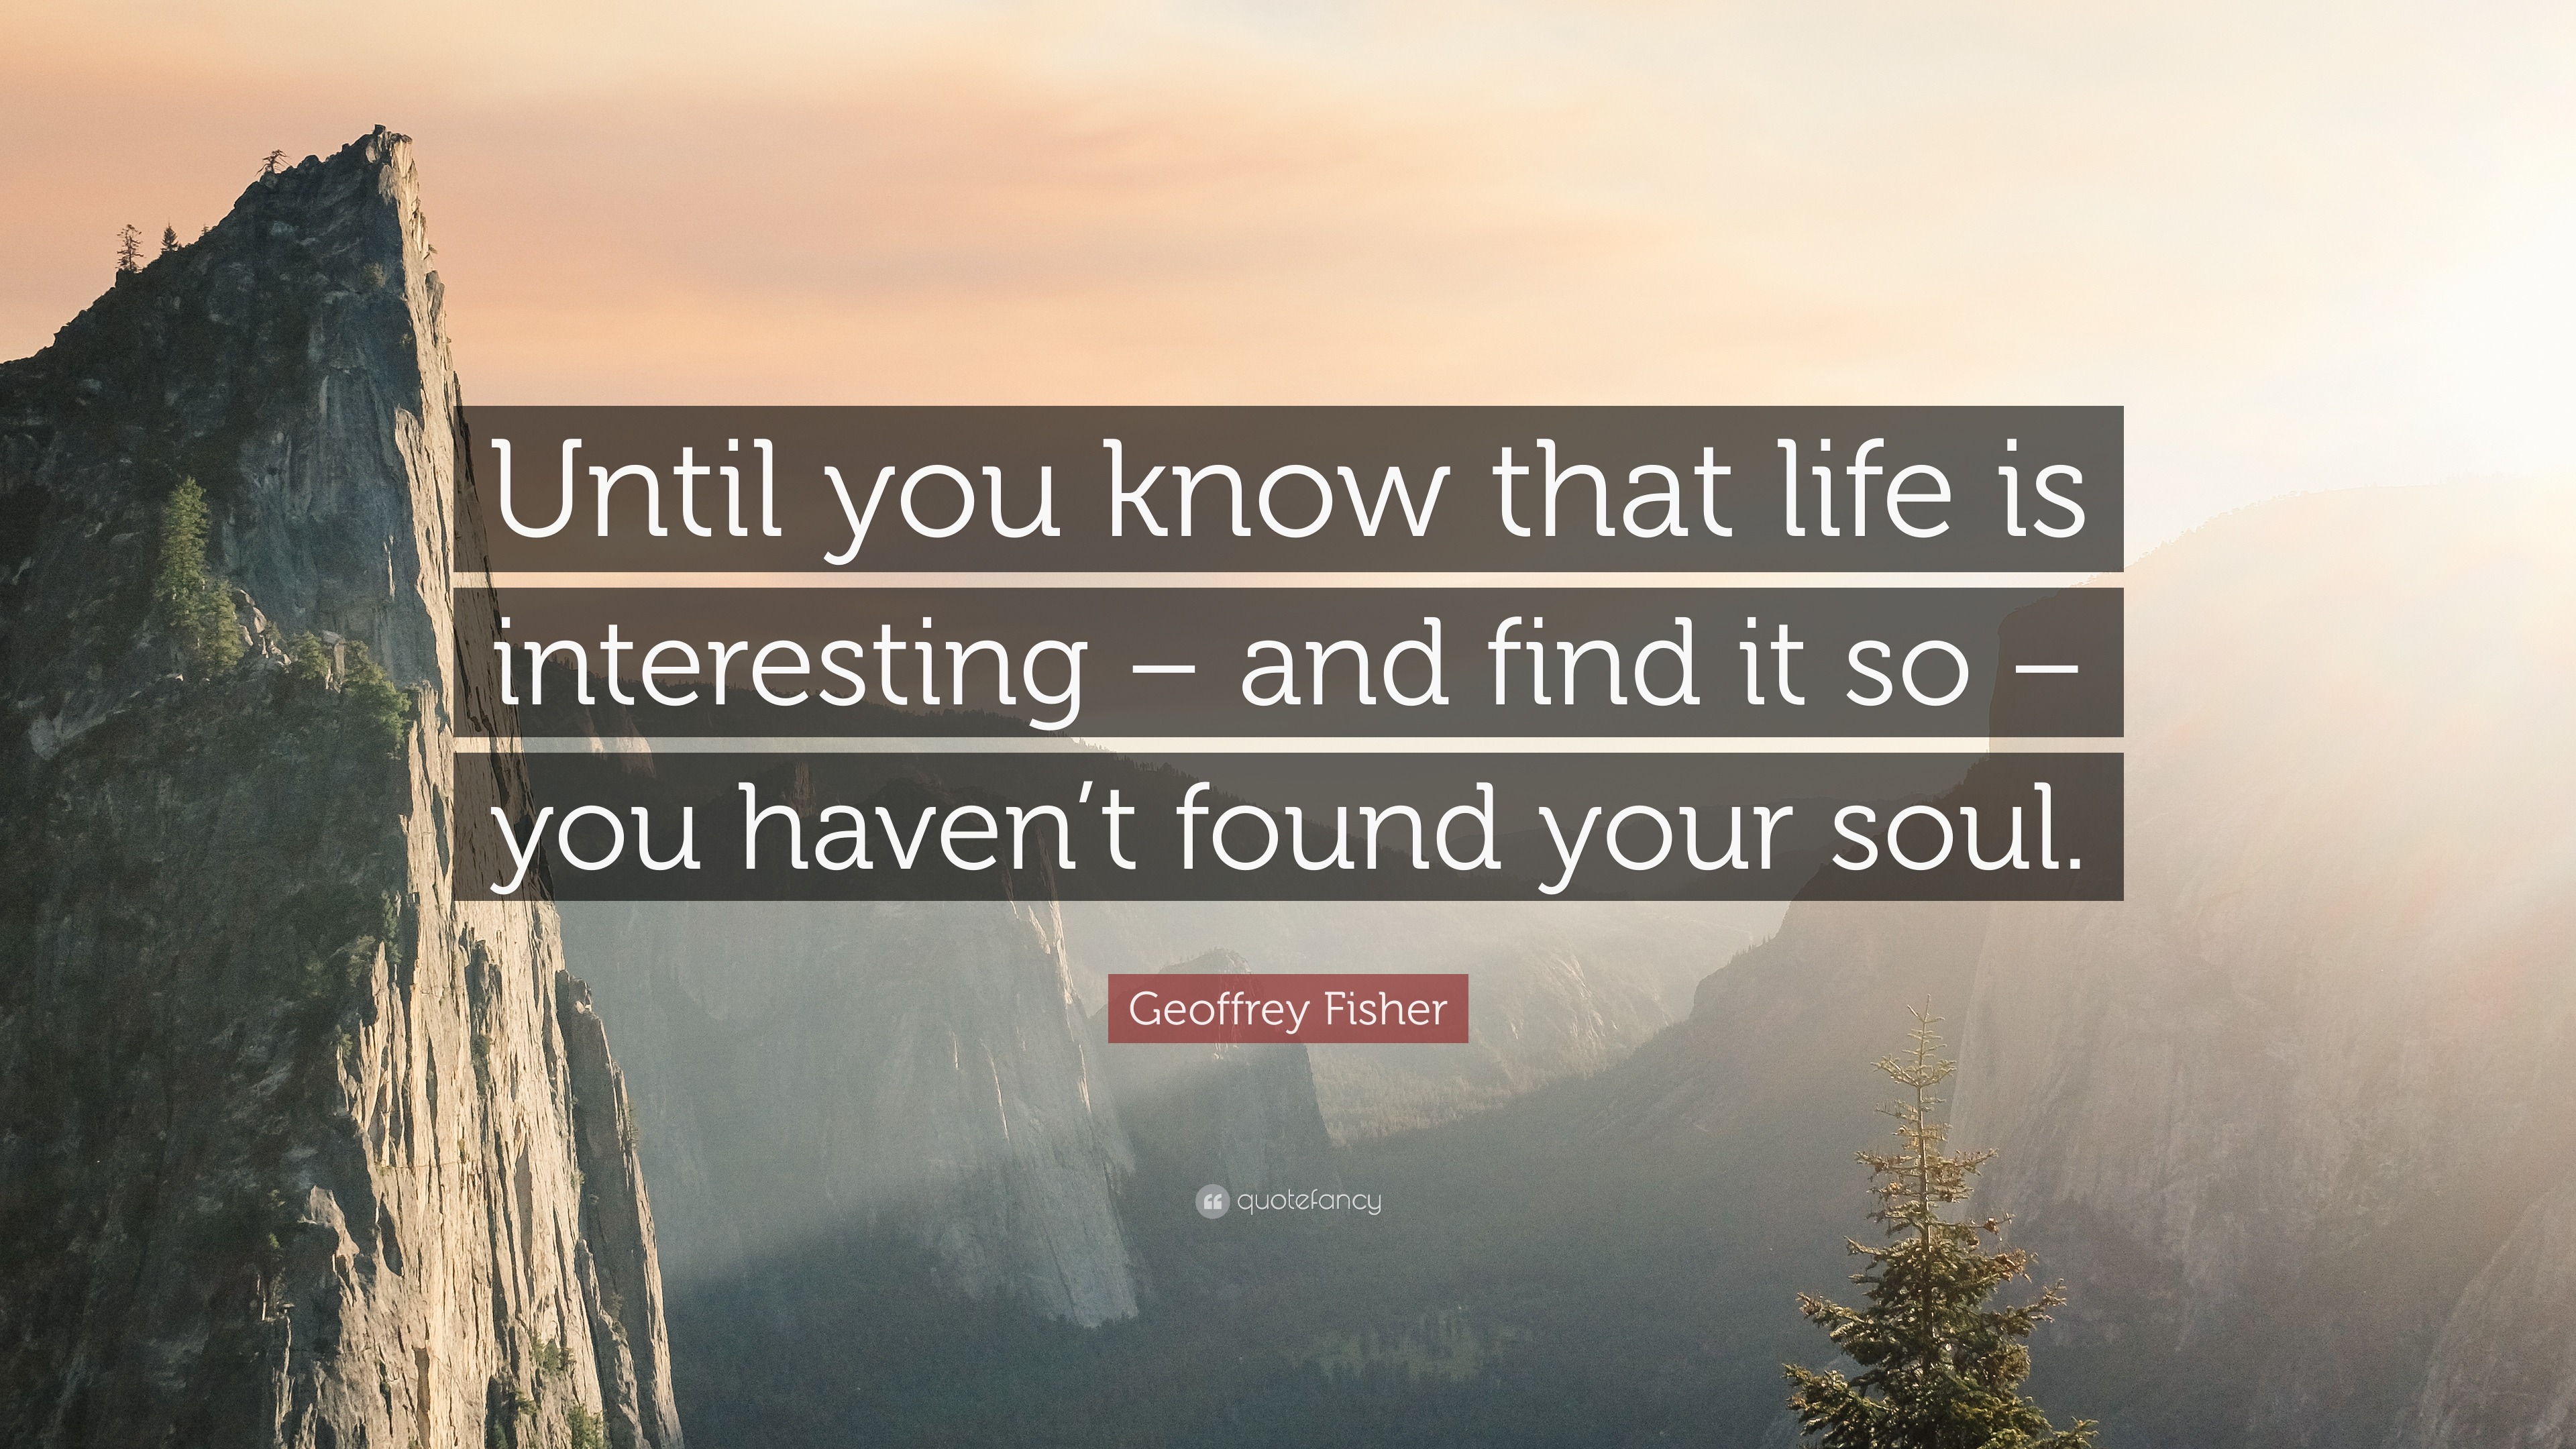 Geoffrey Fisher Quote: “Until you know that life is interesting – and ...